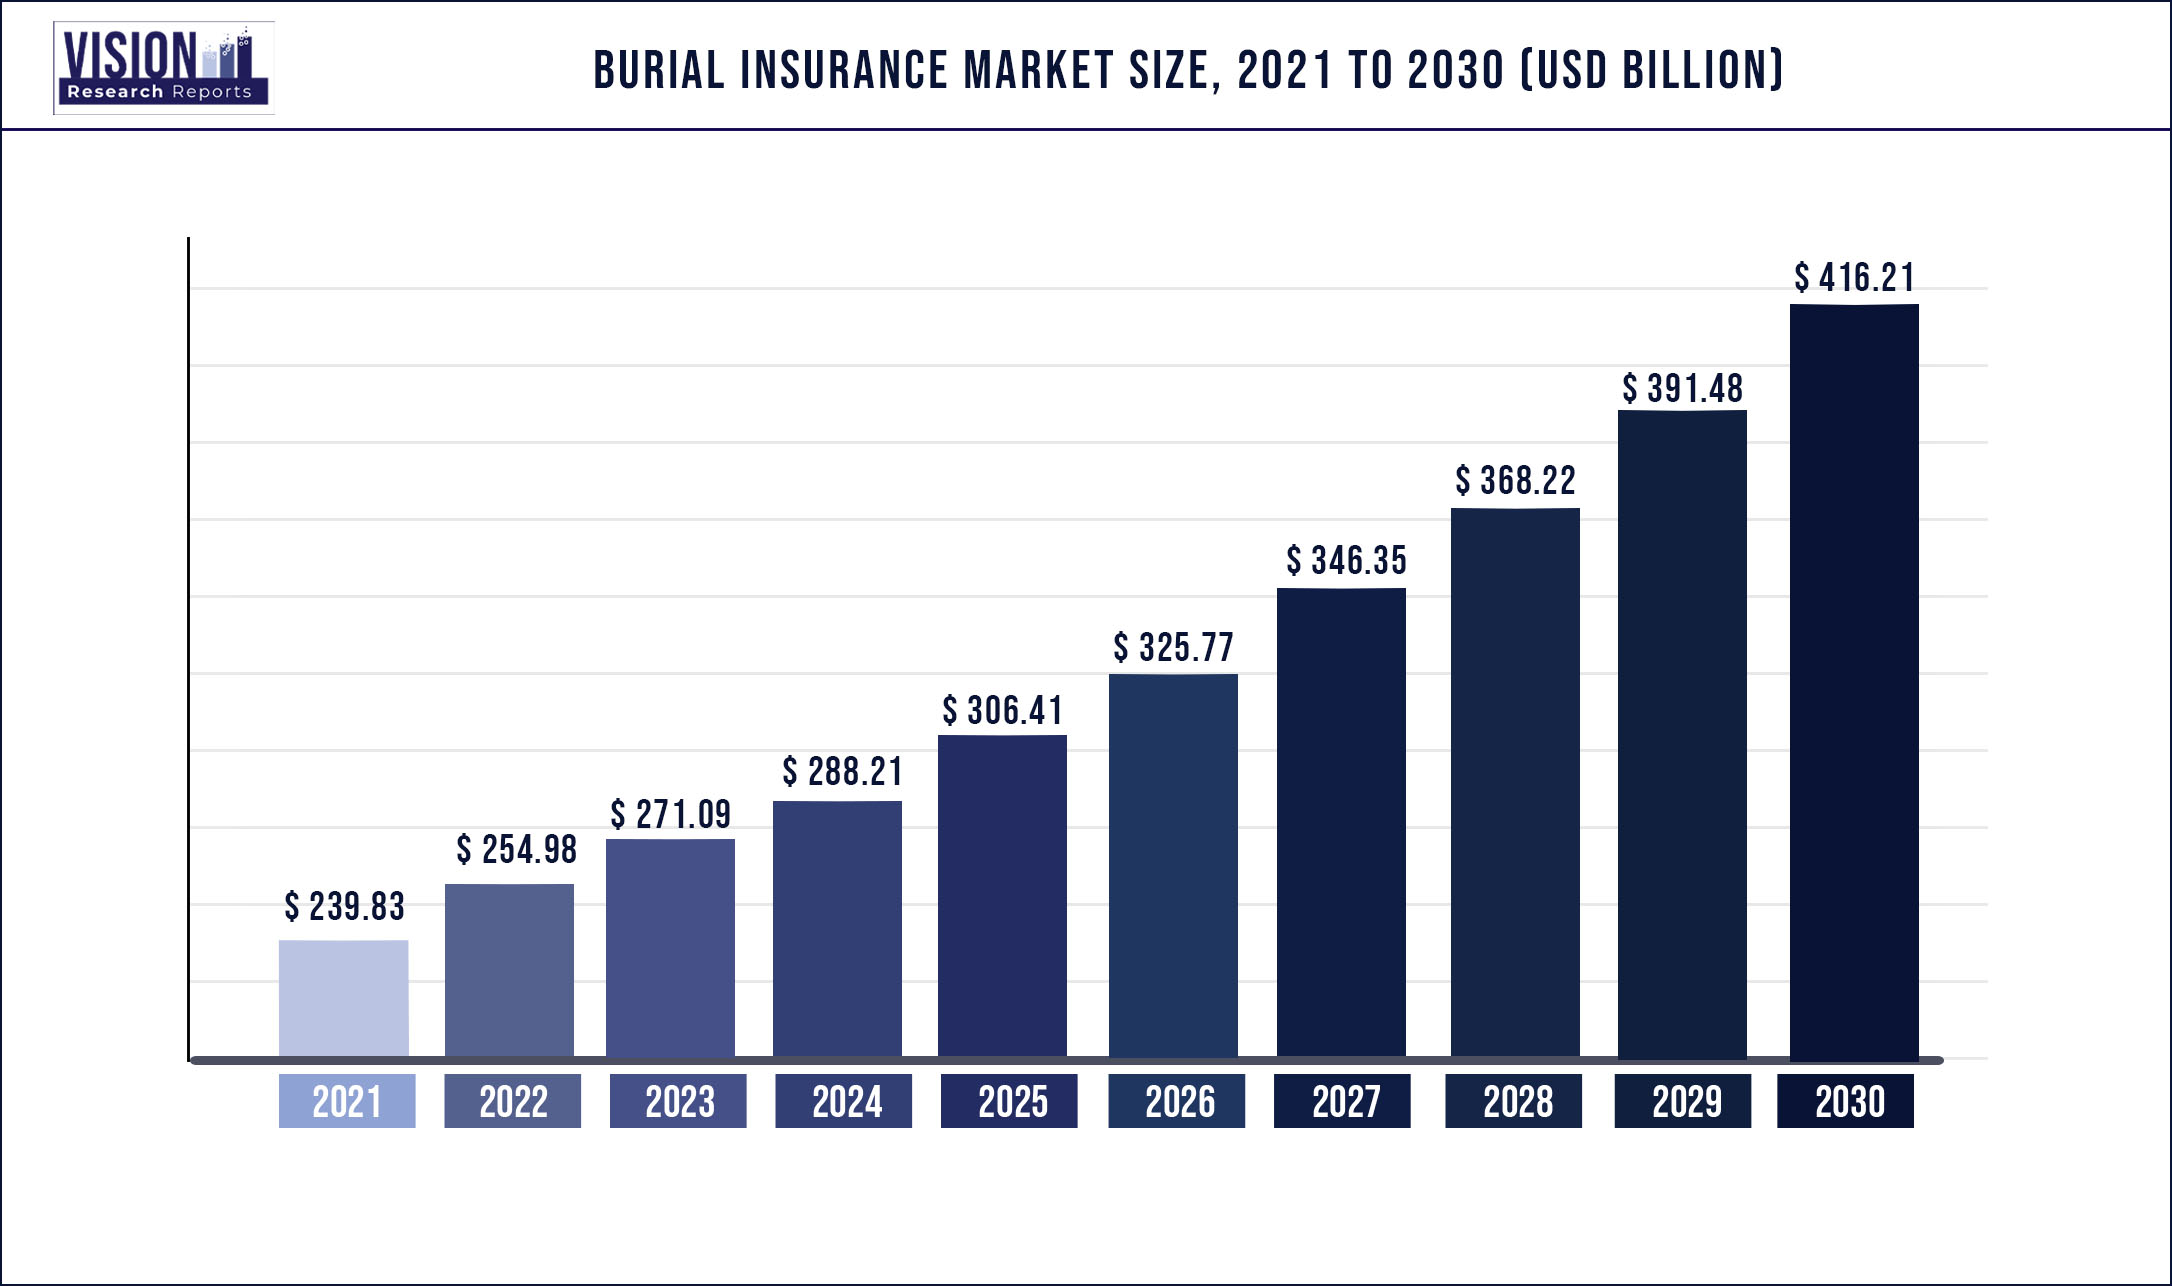 Burial Insurance Market Size 2021 to 2030